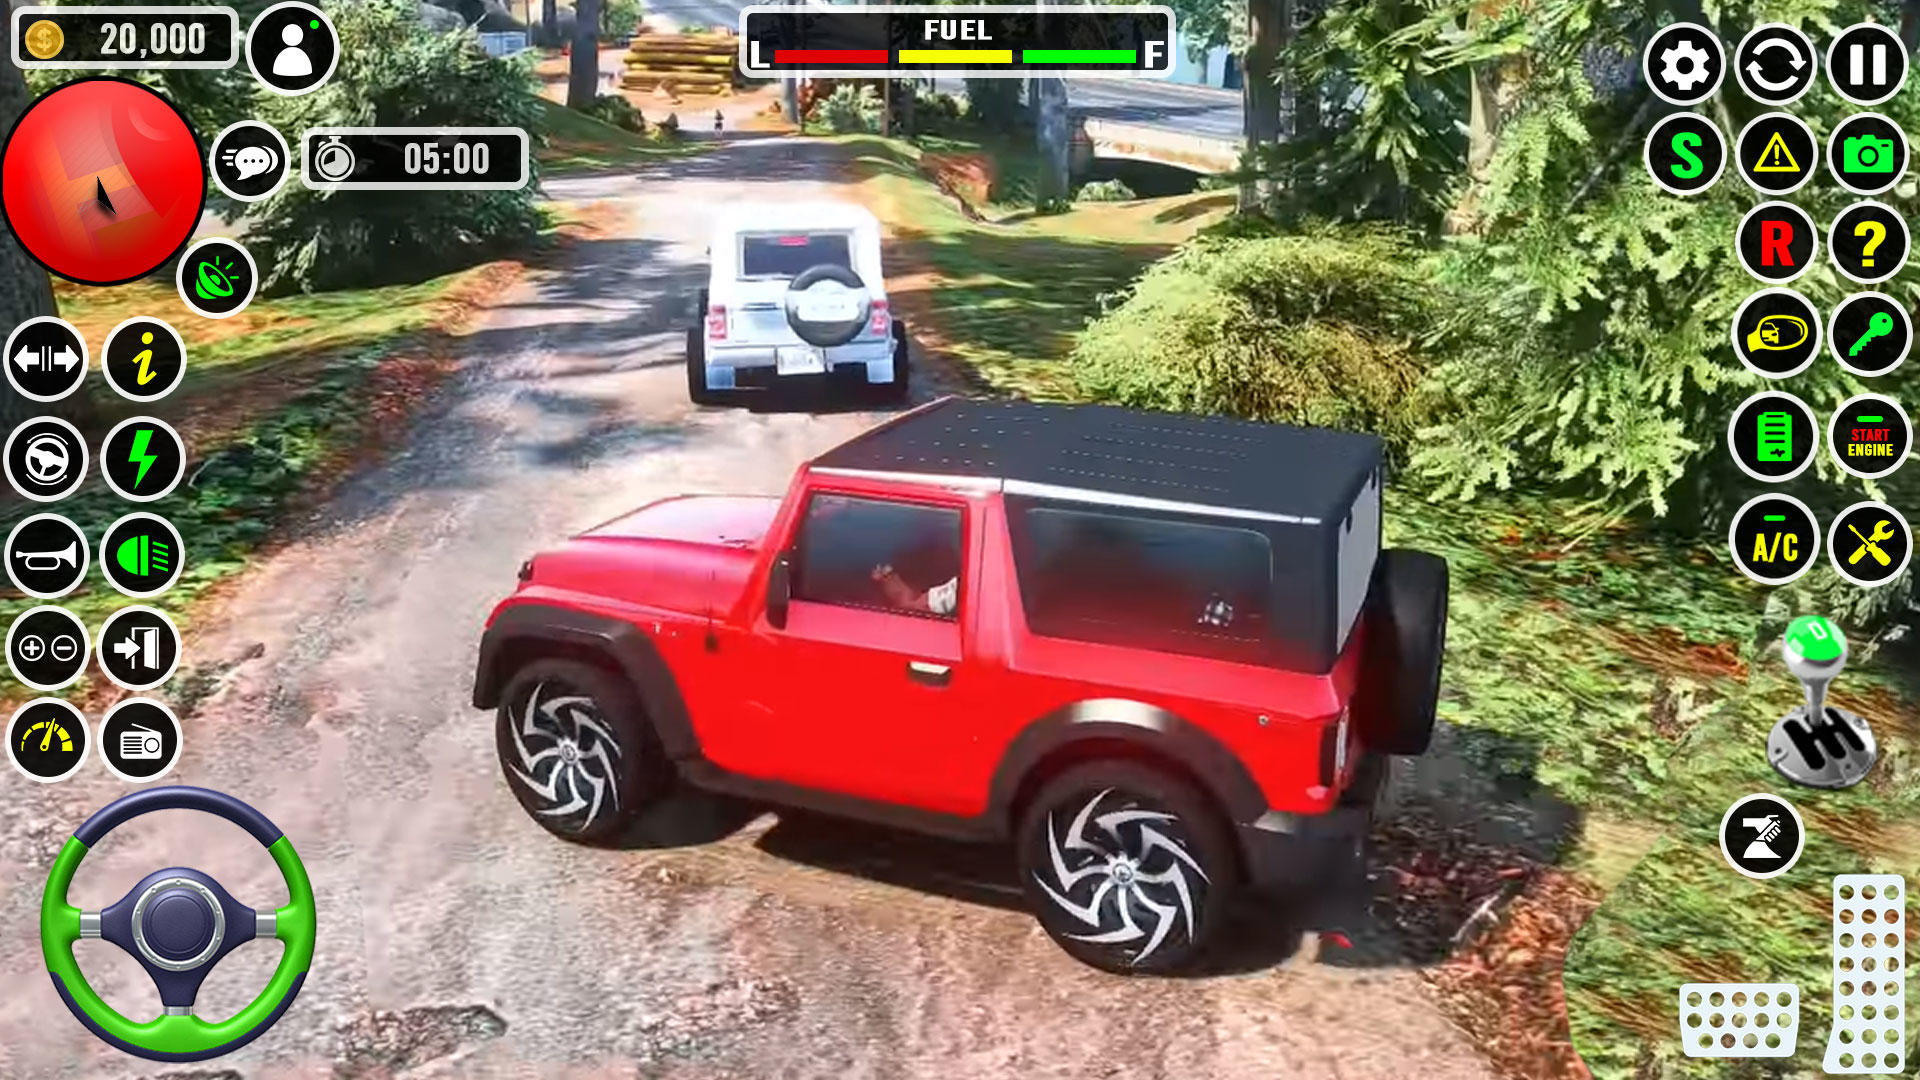 Offroad Jeep 4x4 Jeep Games screenshot game